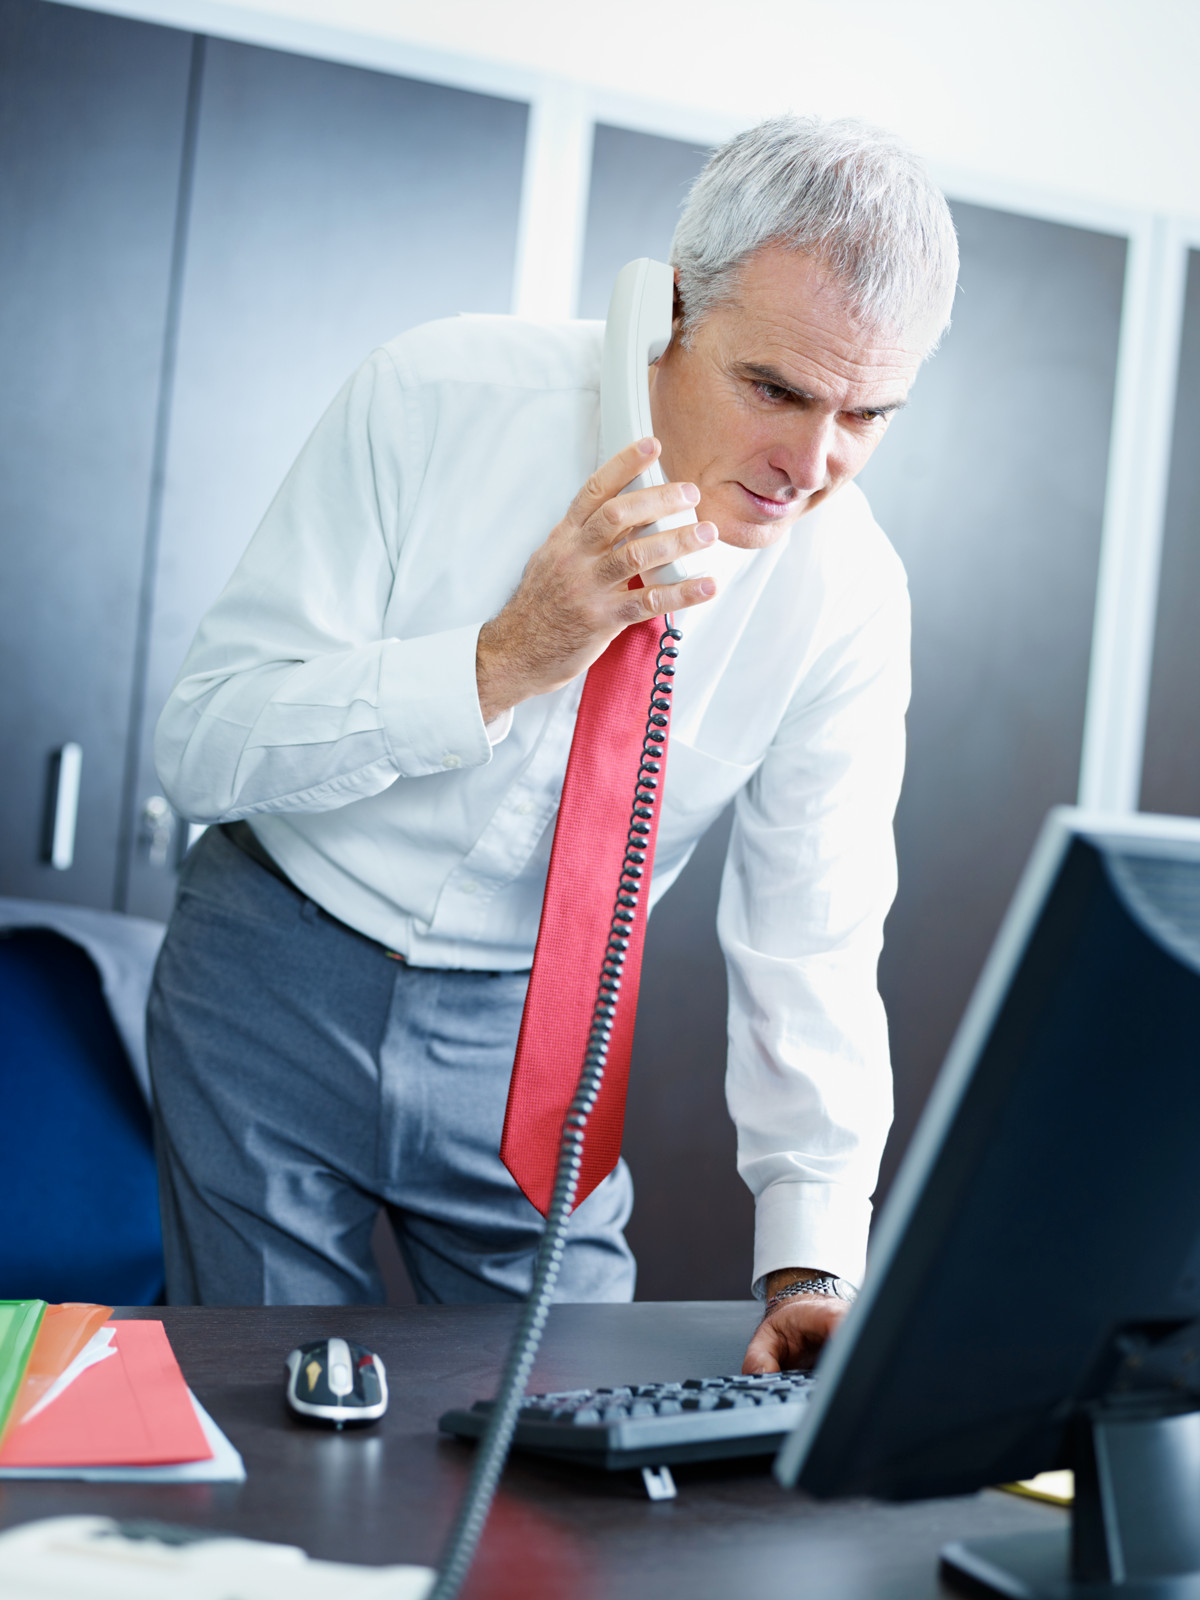 Businessman on Phone in Office Setting